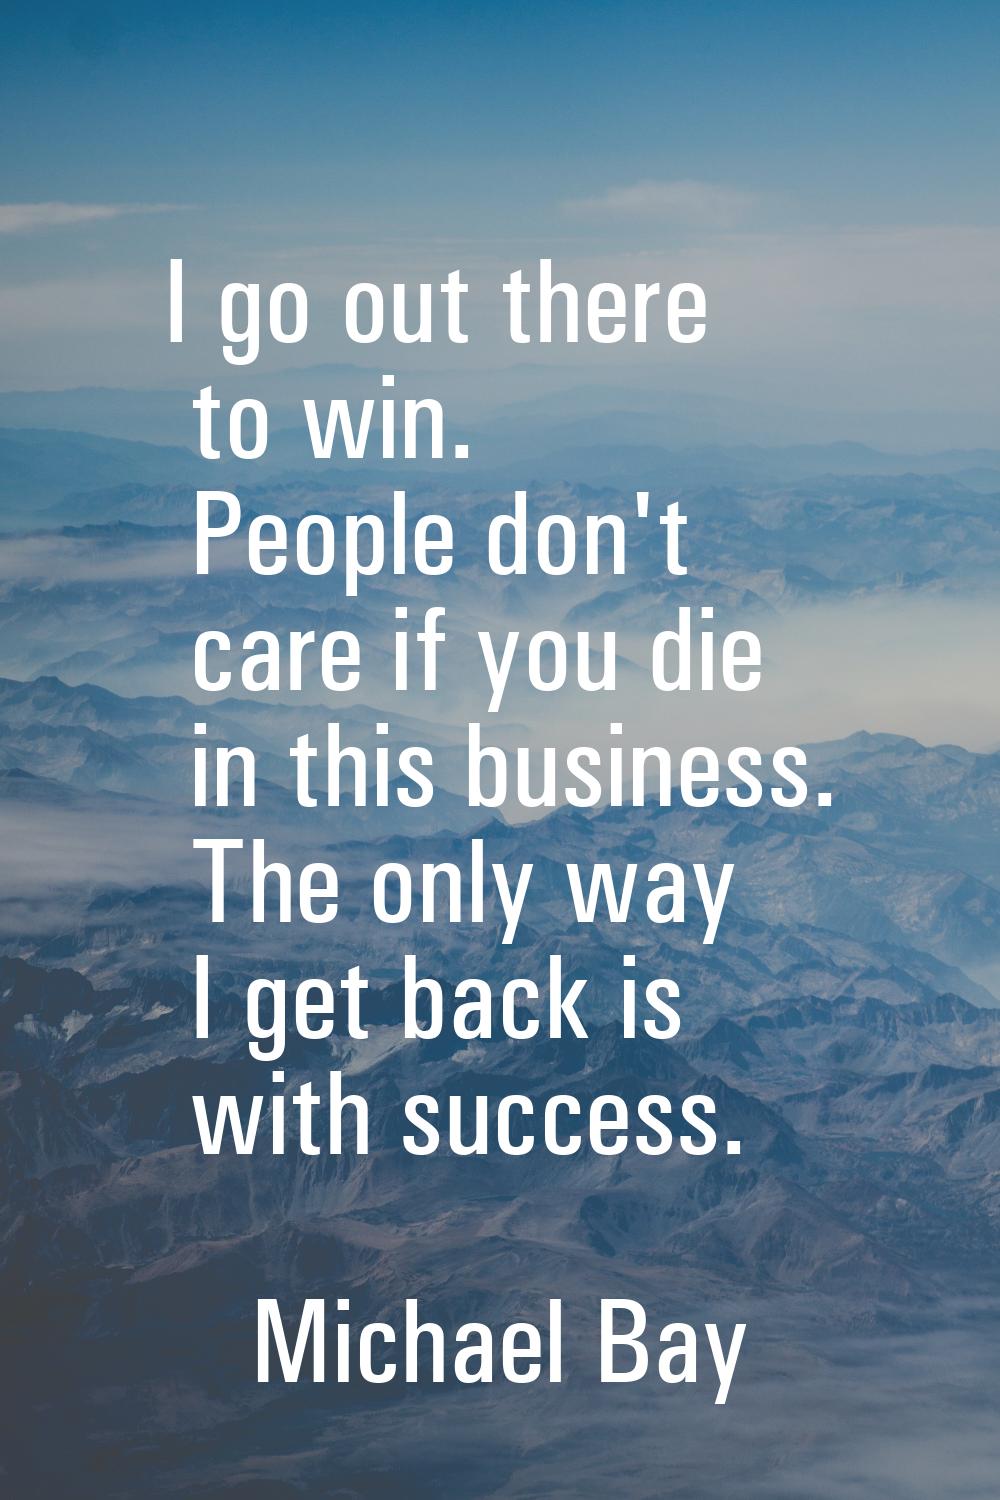 I go out there to win. People don't care if you die in this business. The only way I get back is wi